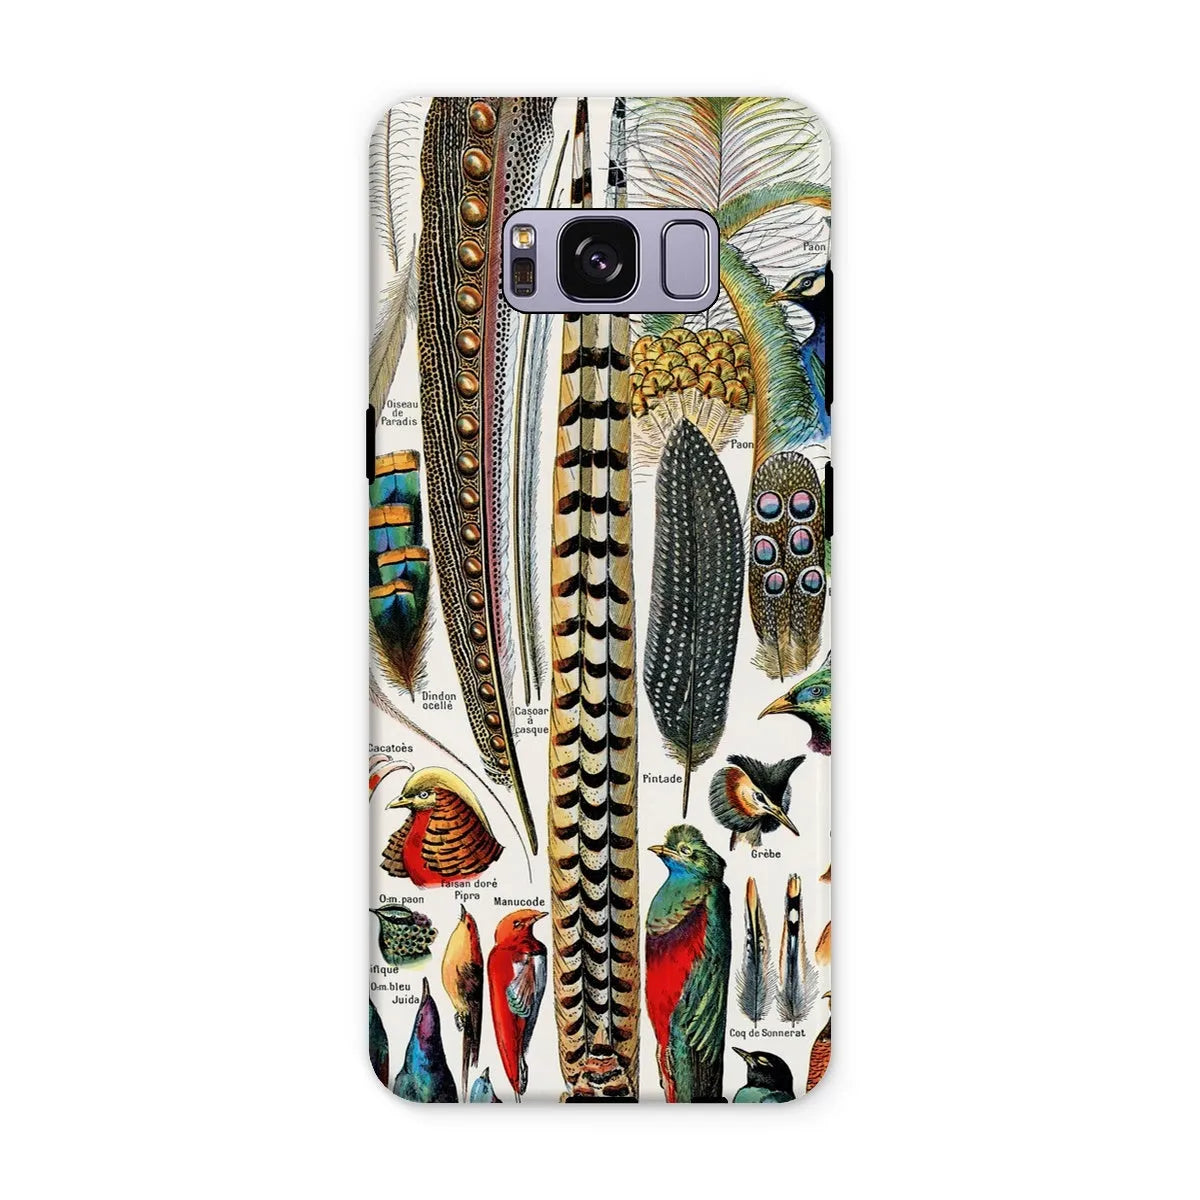 Plumes - Feathers By Adolphe Millot Tough Phone Case - Samsung Galaxy S8 Plus / Matte - Aesthetic Art